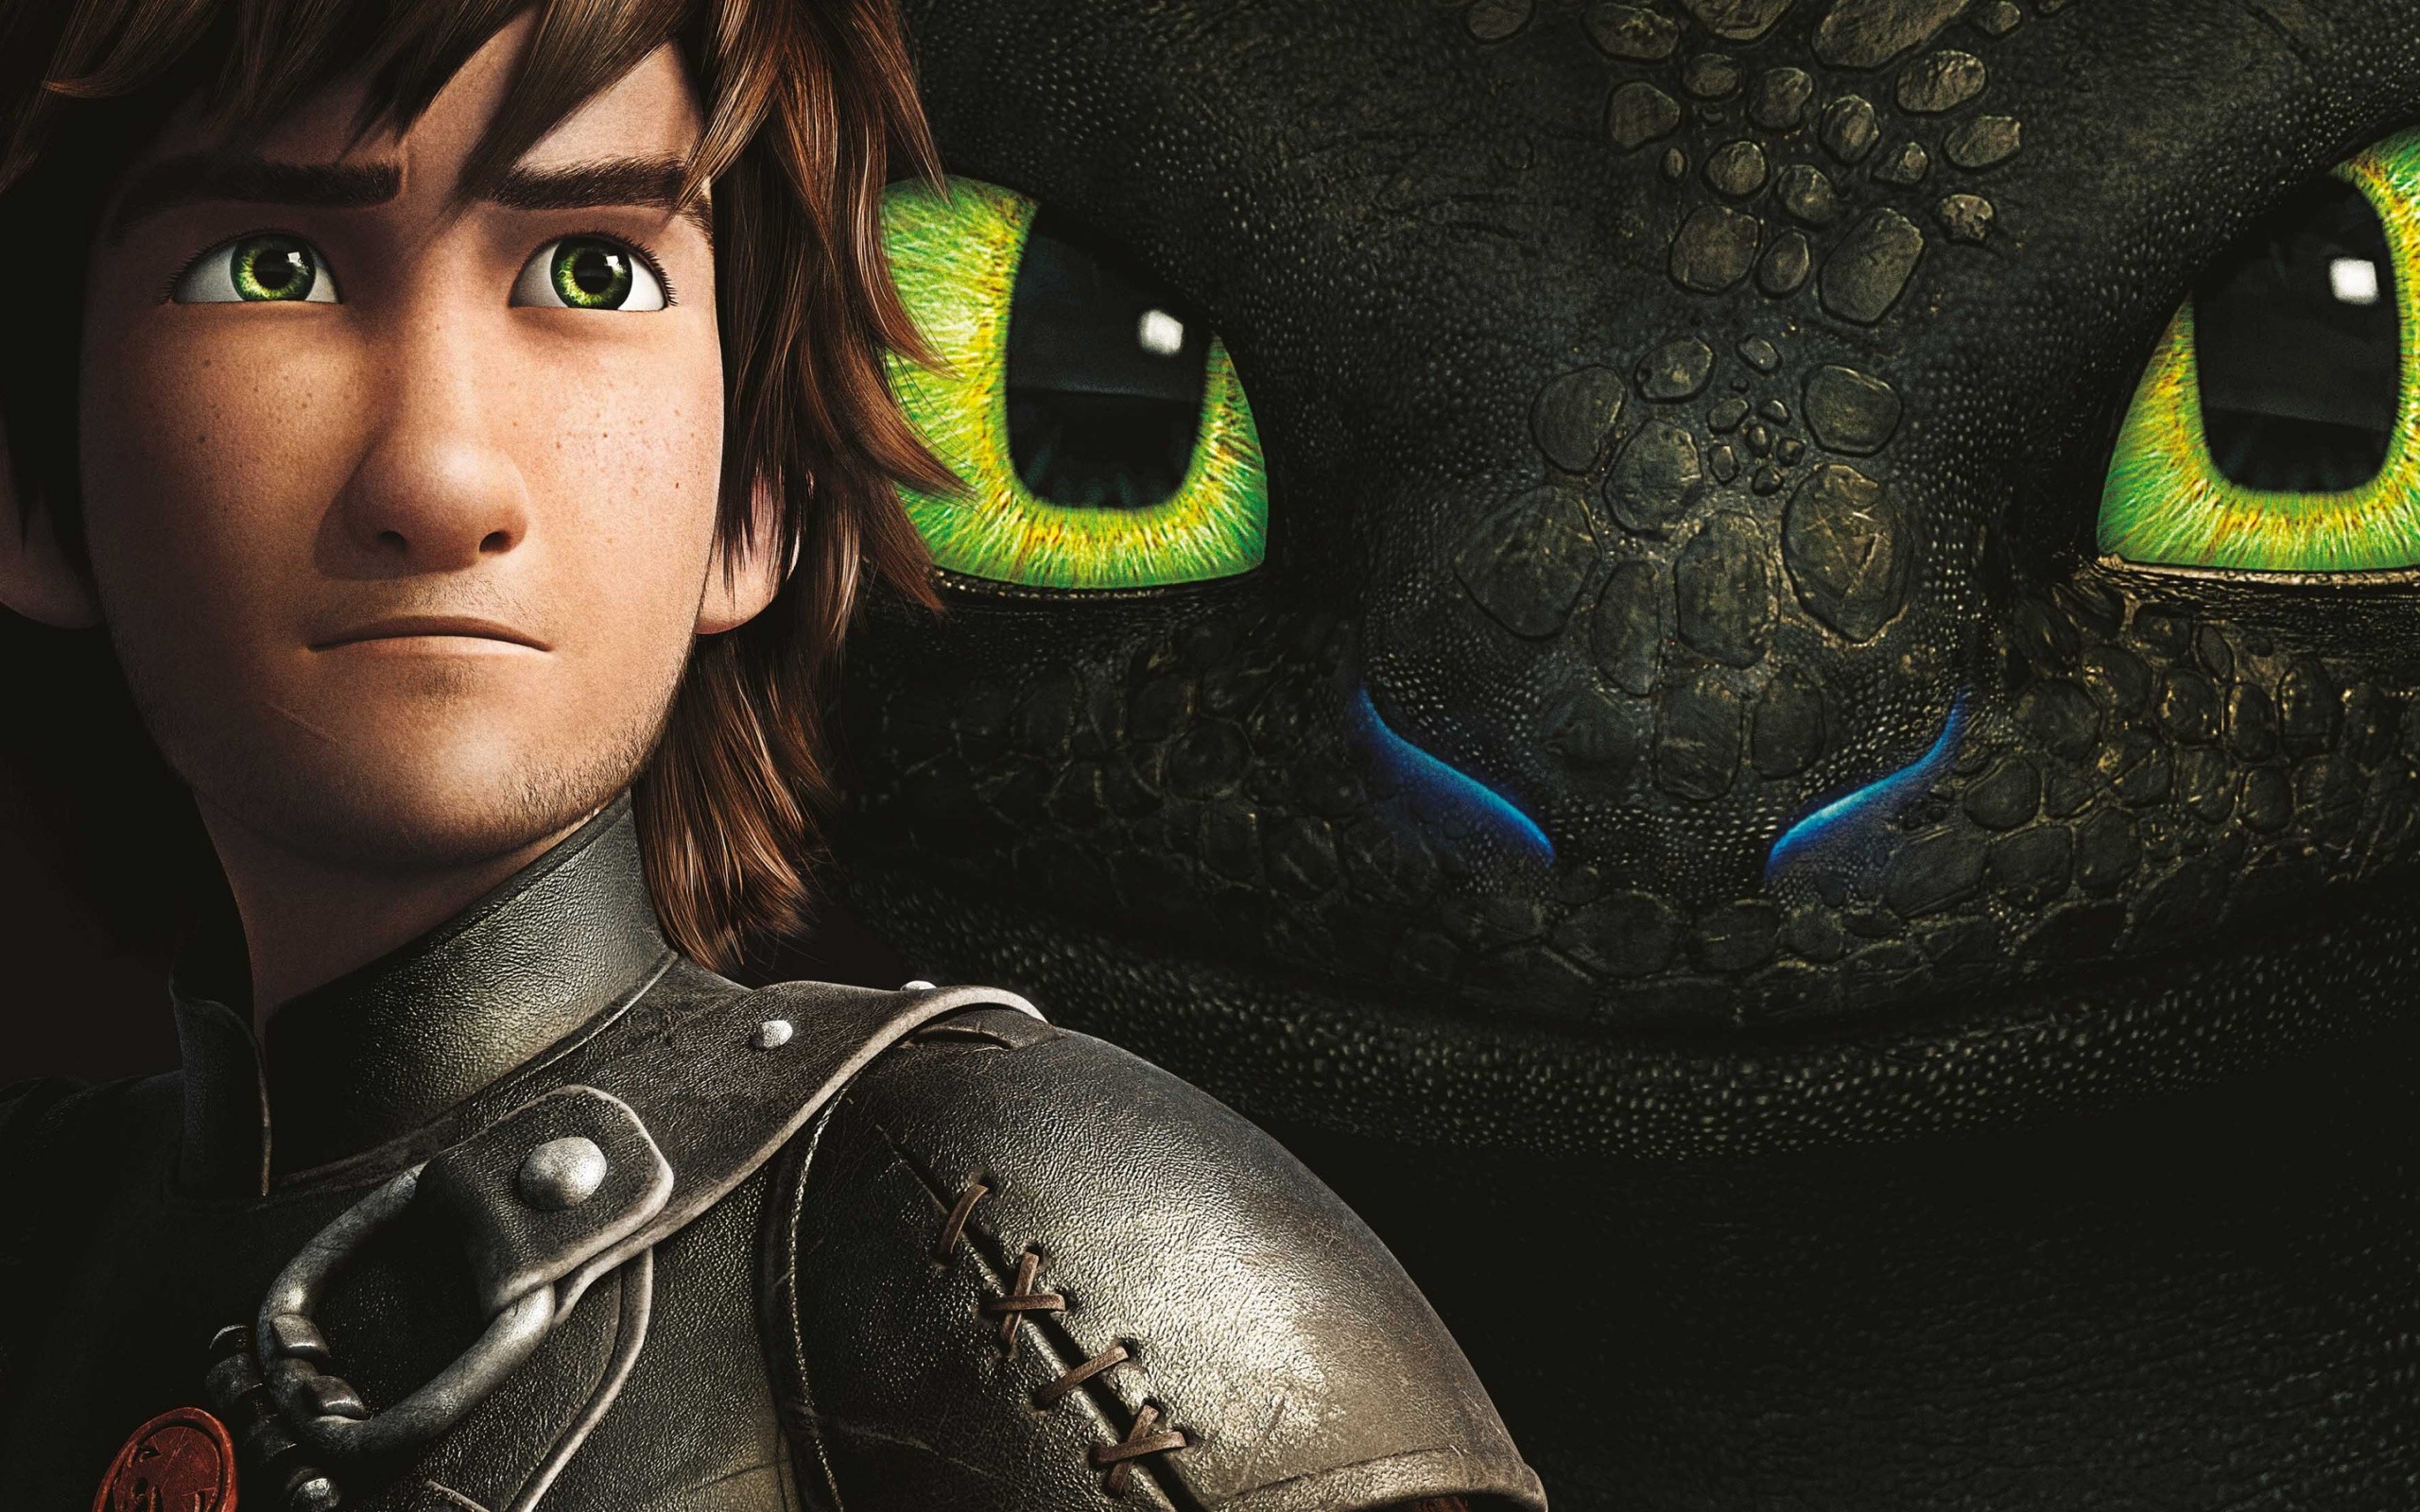 2560x1600 148 How to Train Your Dragon 2 HD Wallpapers | Backgrounds - Wallpaper Abyss